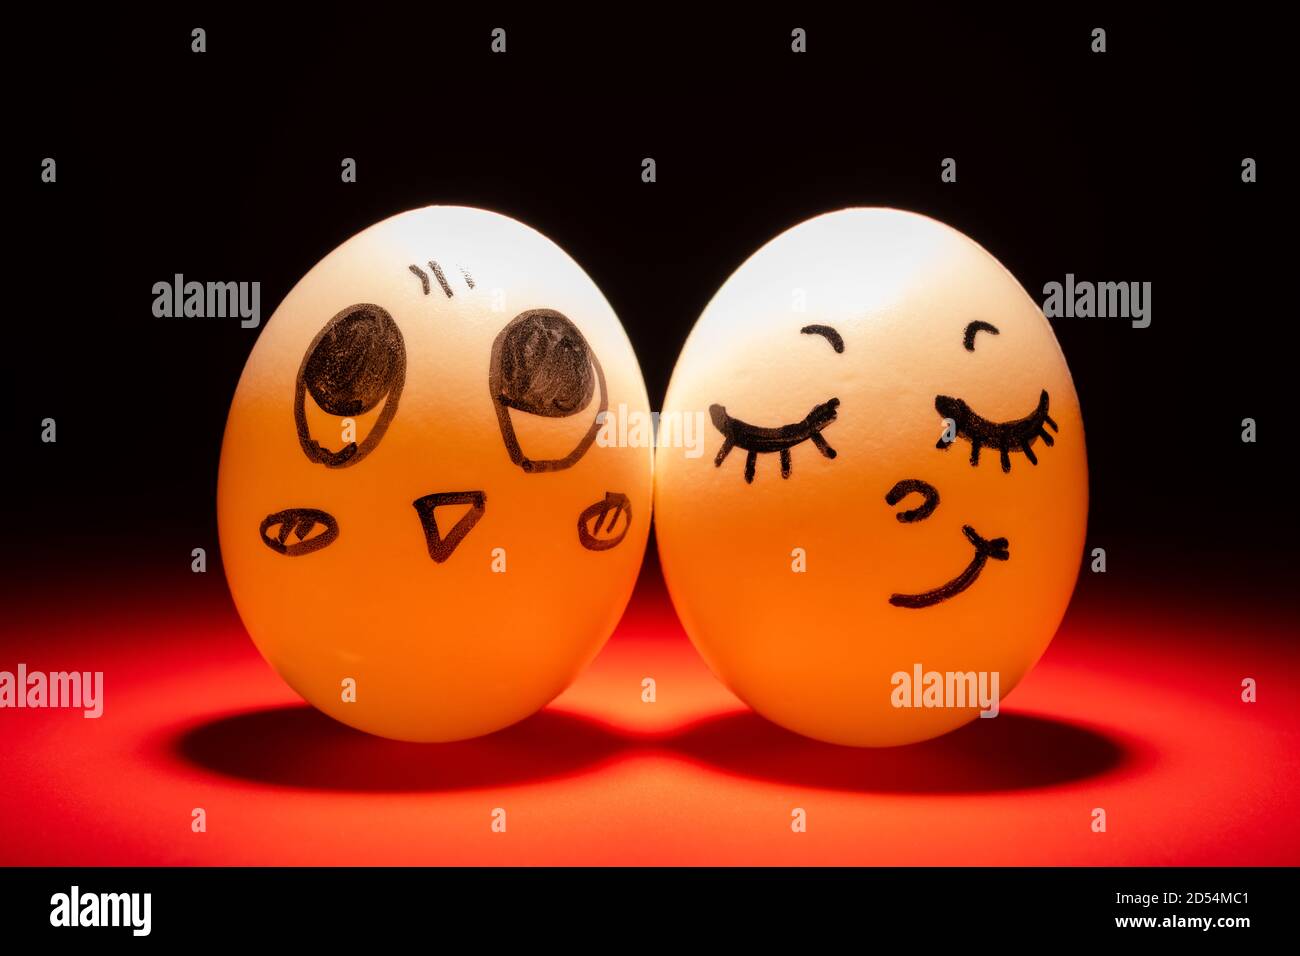 egg faces of lovely couple highlighted in dark Stock Photo